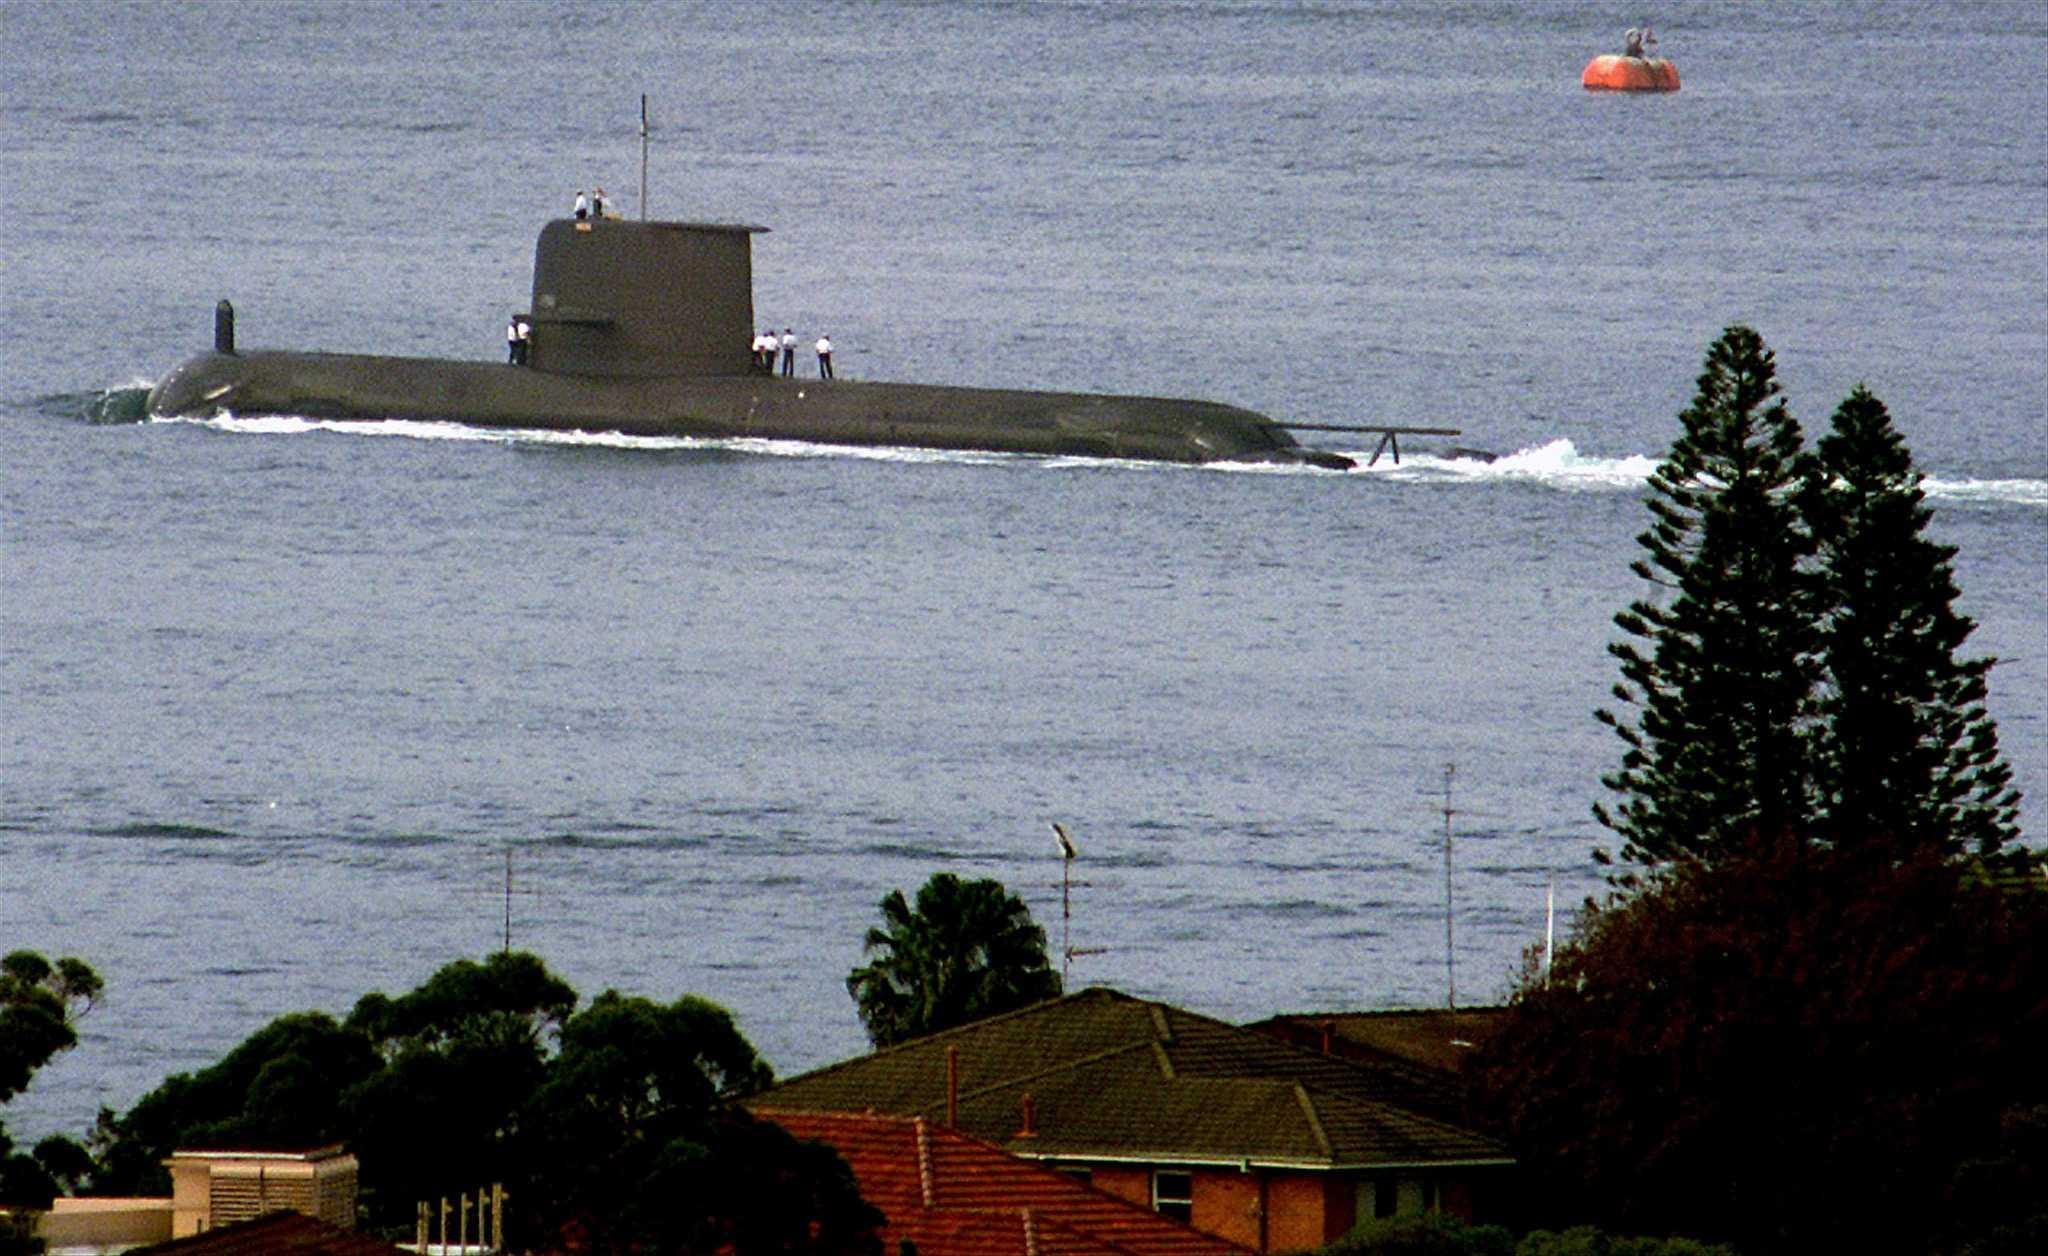 The Royal Australian Navy's newest Collins class submarine, HMAS Waller, leaves Sydney Harbour May 4. Photo: Reuters